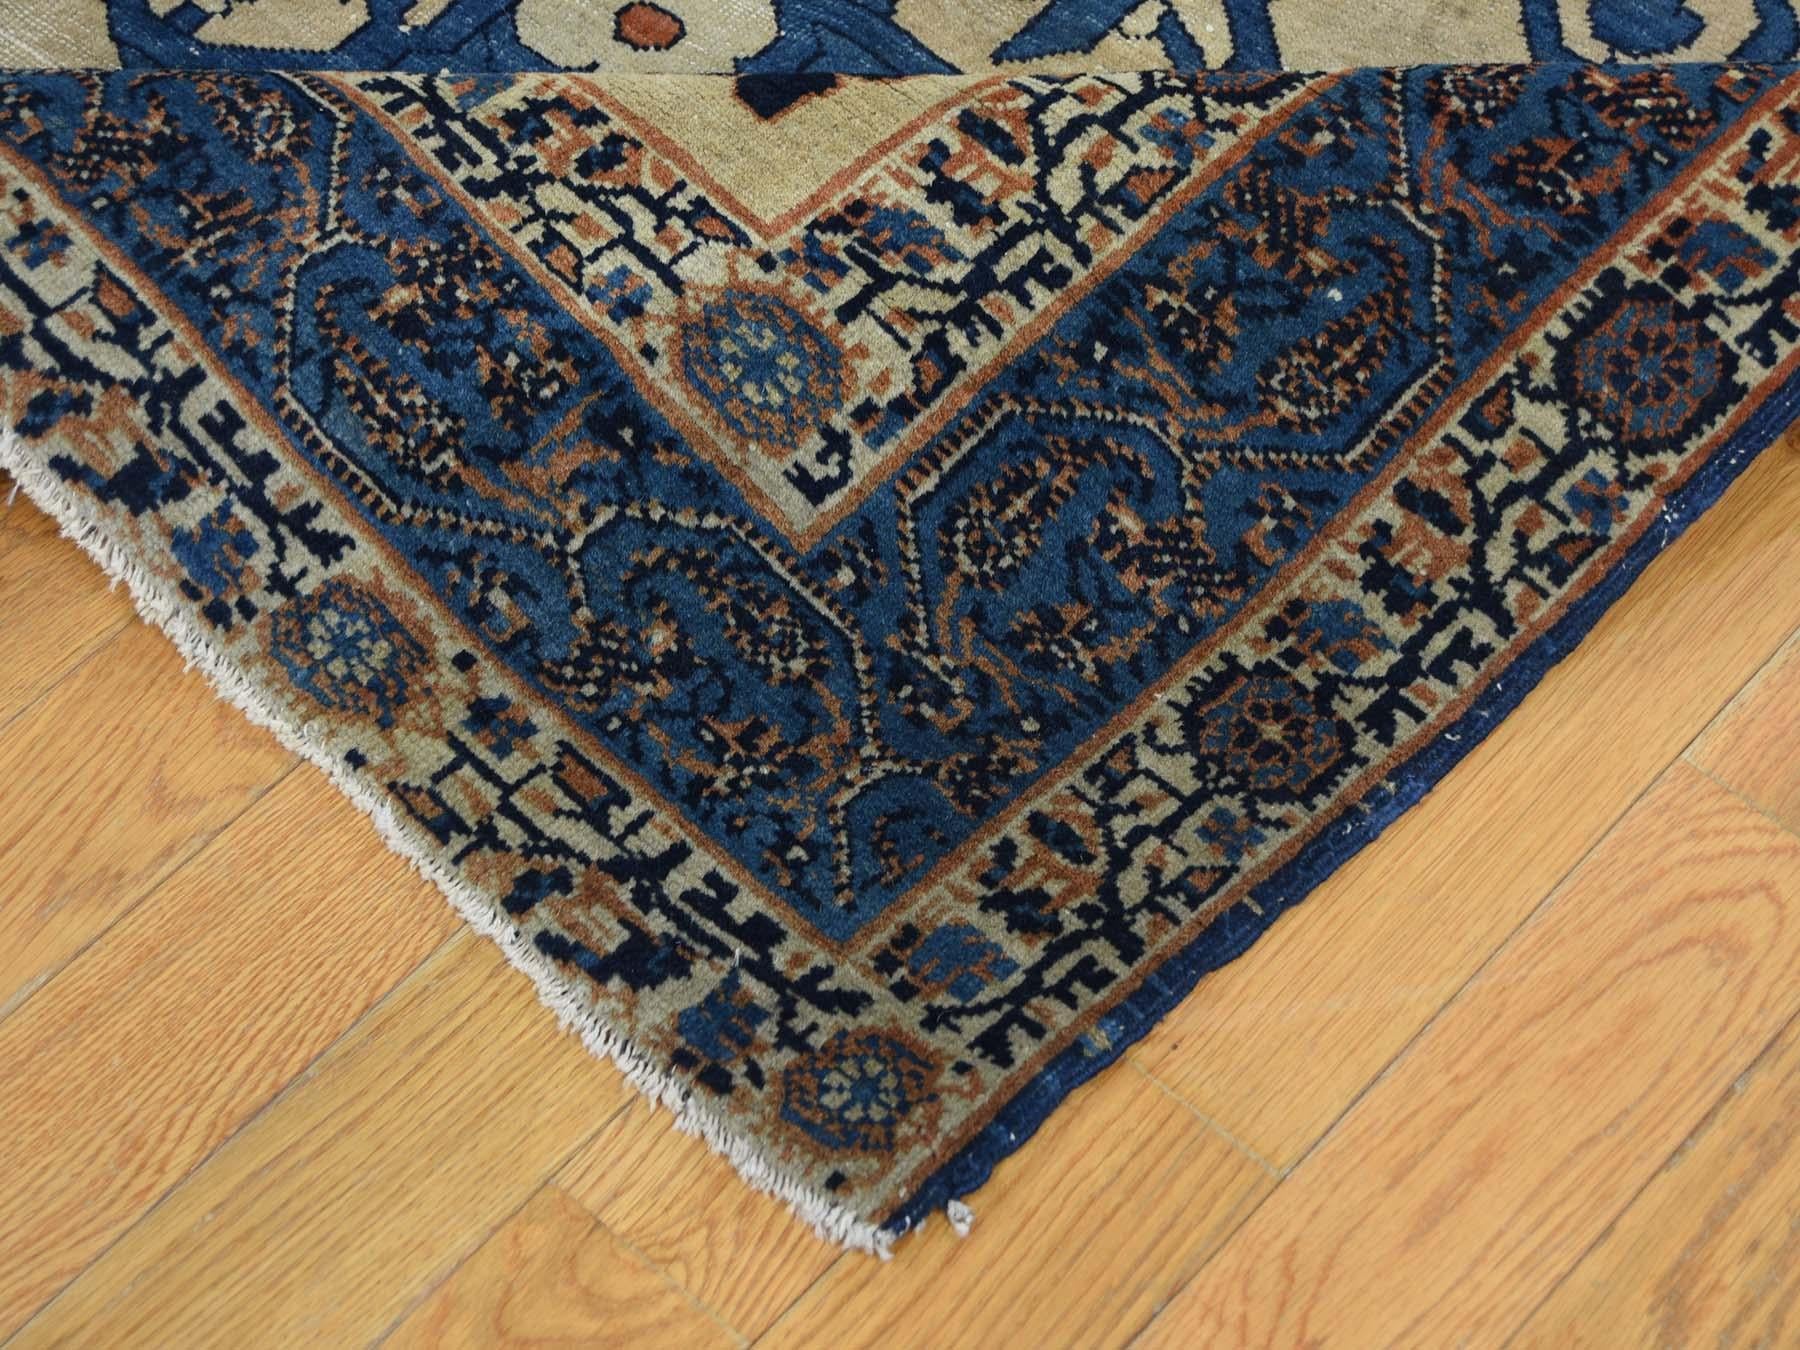 This is a genuine hand knotted oriental rug. It is not hand tufted or machine made rug. Our entire inventory is made of either hand knotted or handwoven rugs.

Bring life to your home with this admirable antique carpet. This handcrafted Persian